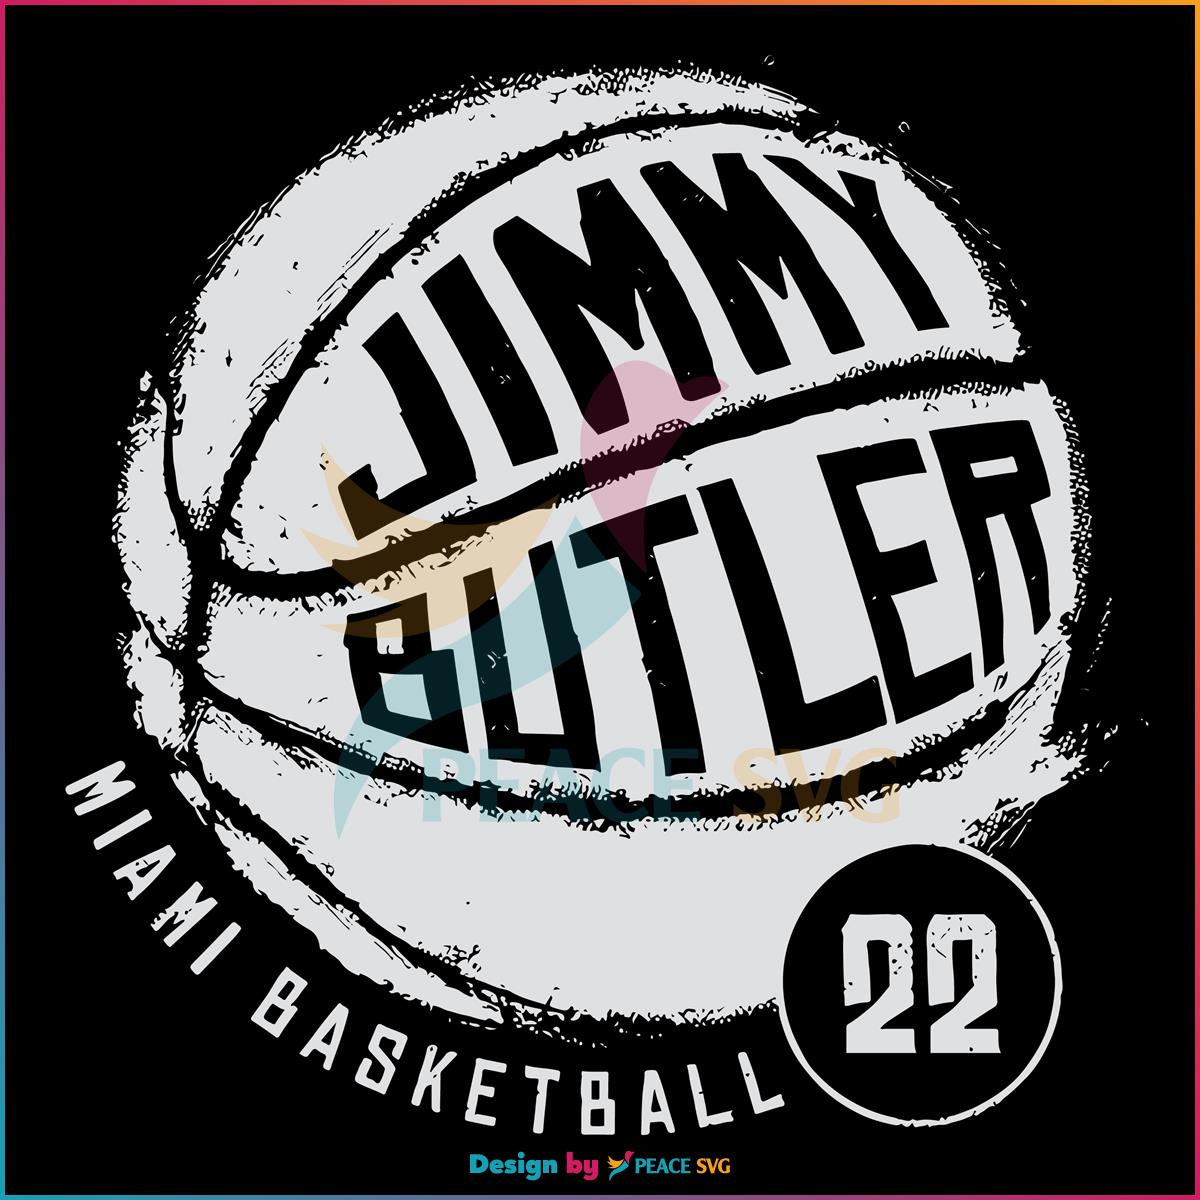 jimmy-butler-22-miami-basketball-player-svg-graphic-design-files